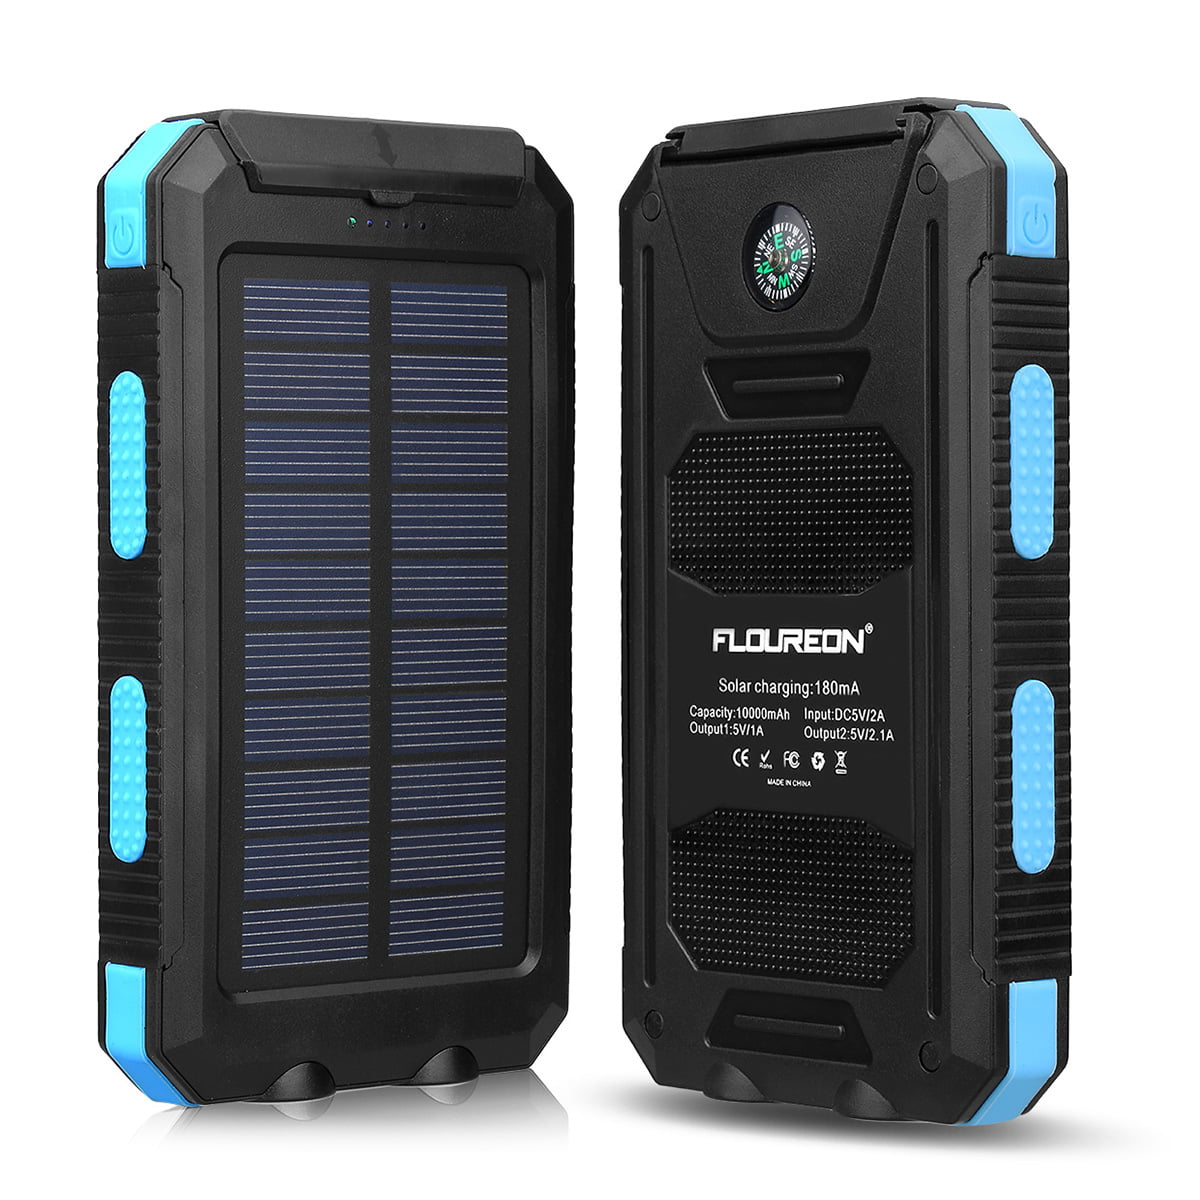 Shockproof,Suitable for iPhoneX Android Smartphones 10000mAh Dual USB Ports Solar Charger Solar Power Bank with LED Status Indicator and LED Flashlight IP65 Waterproof Bluetooth Speaker iPad 